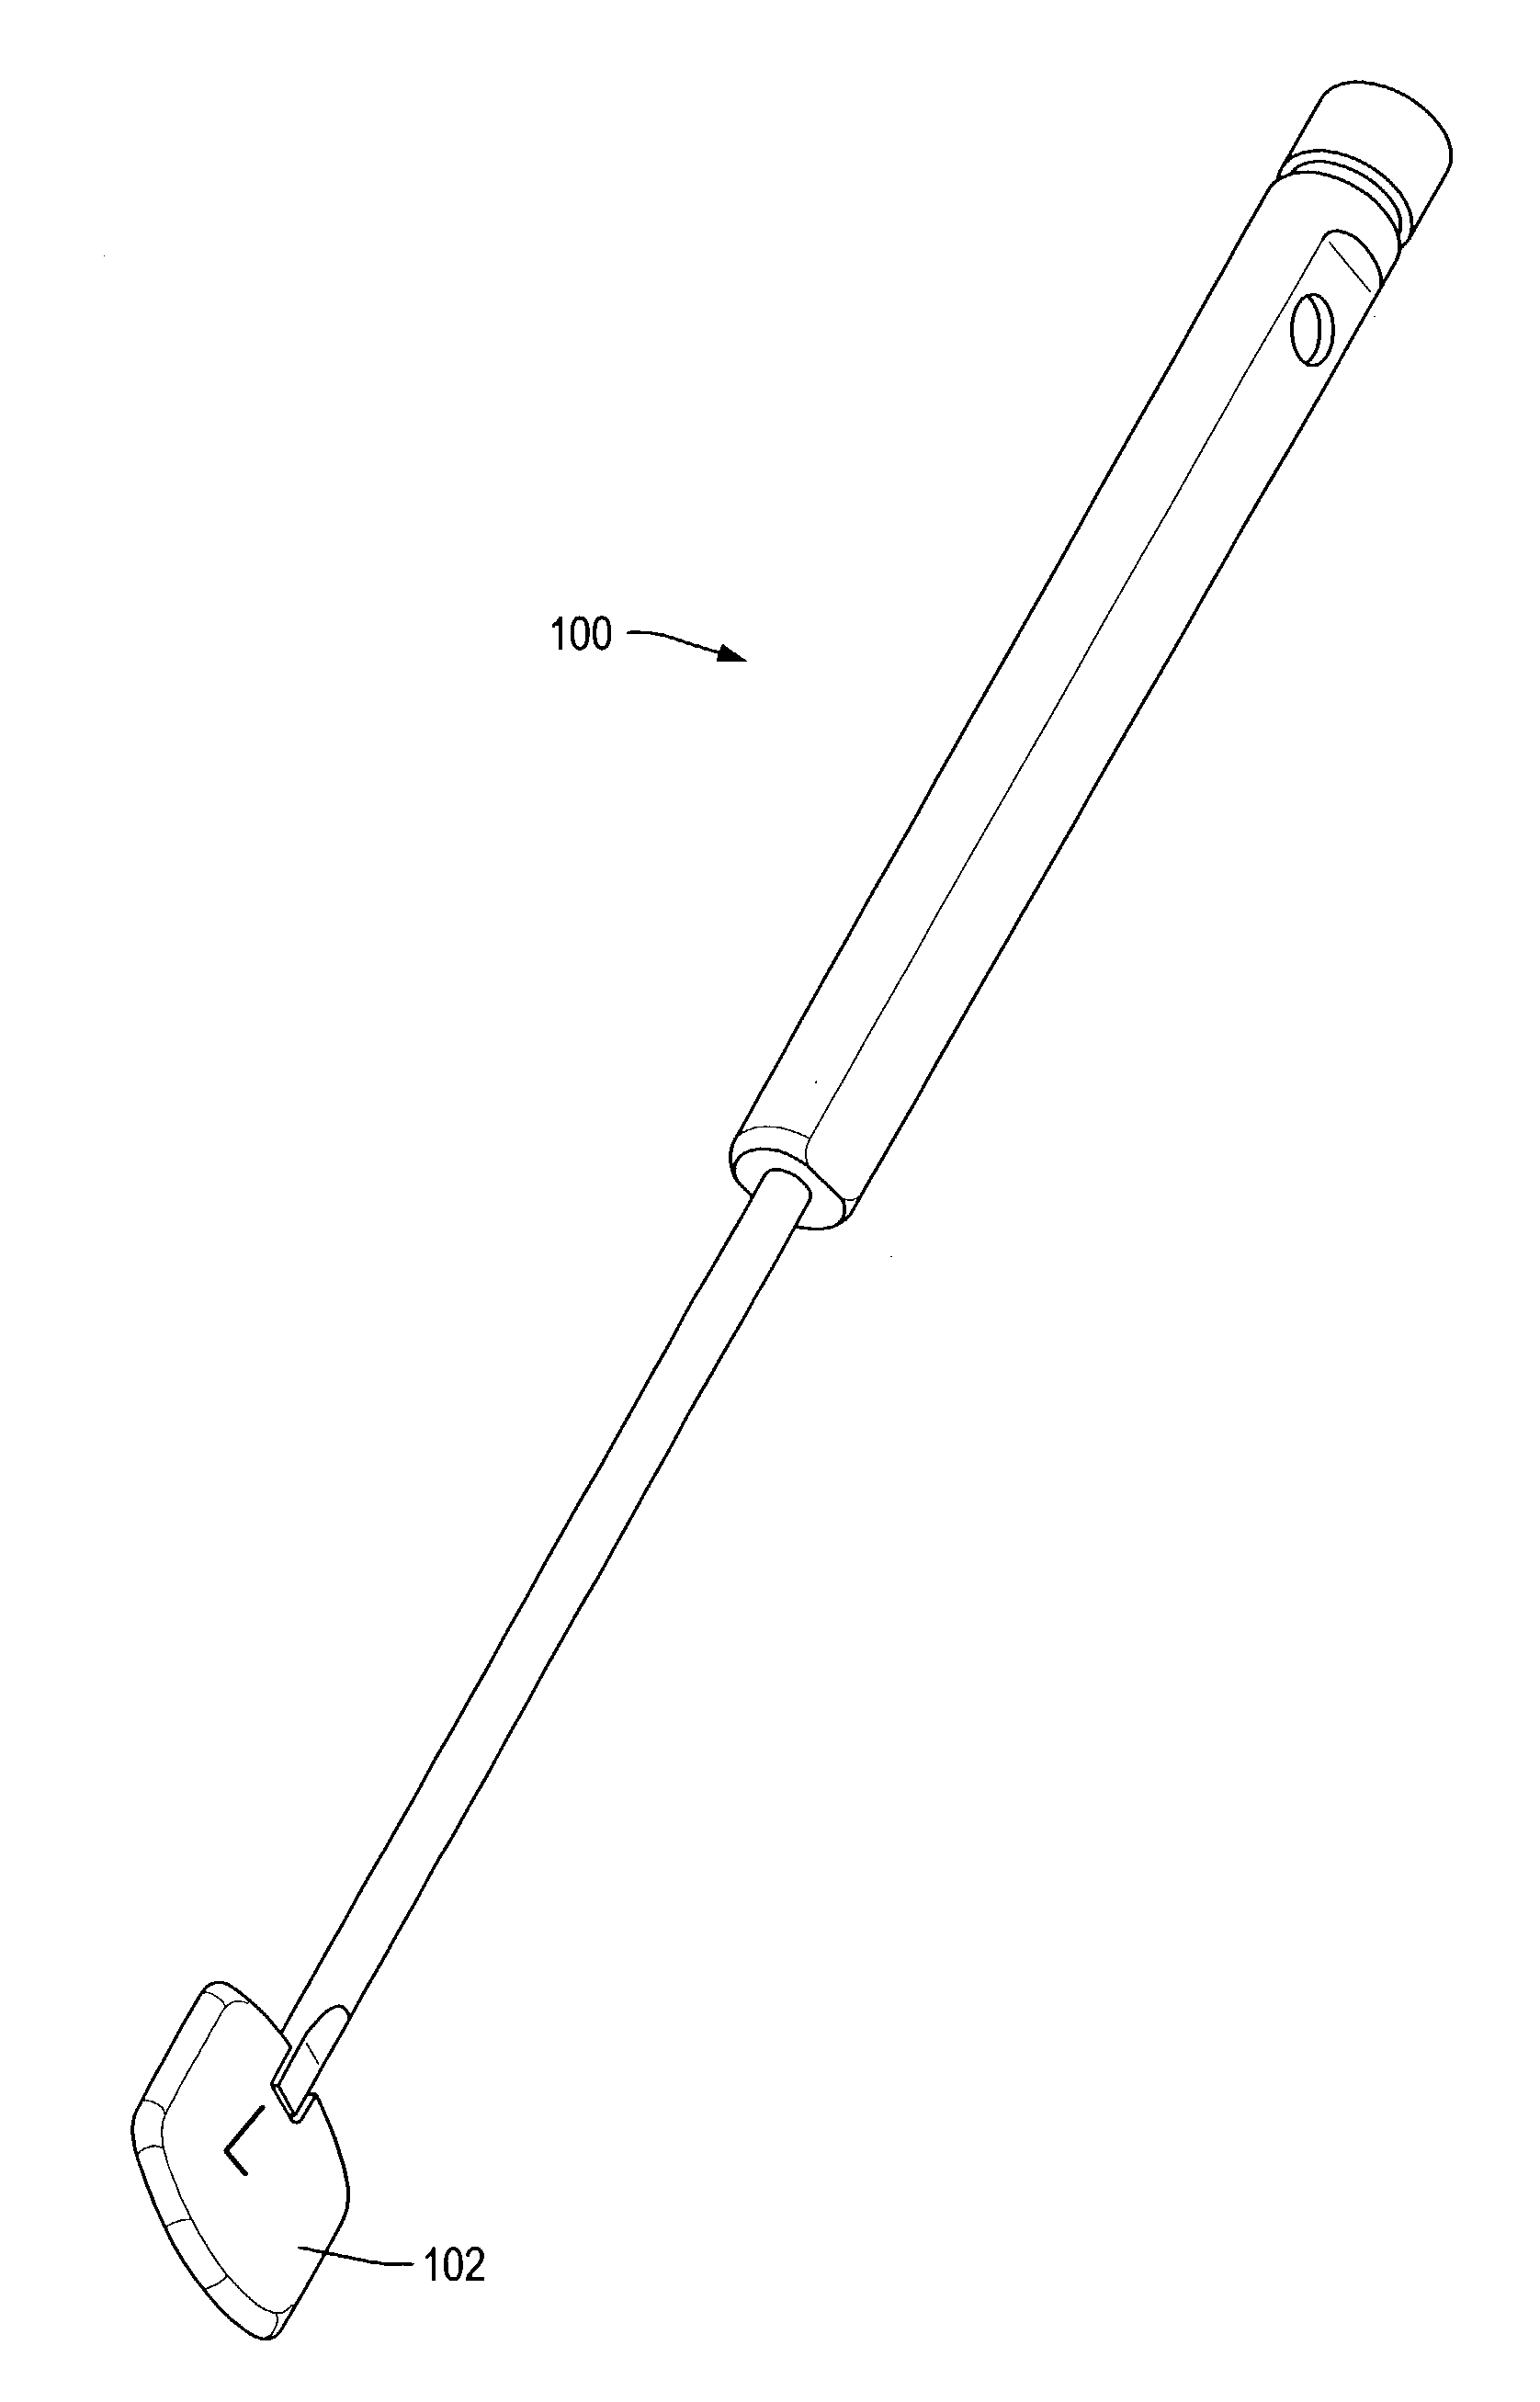 Instrumentation and procedure for implanting spinal implant devices